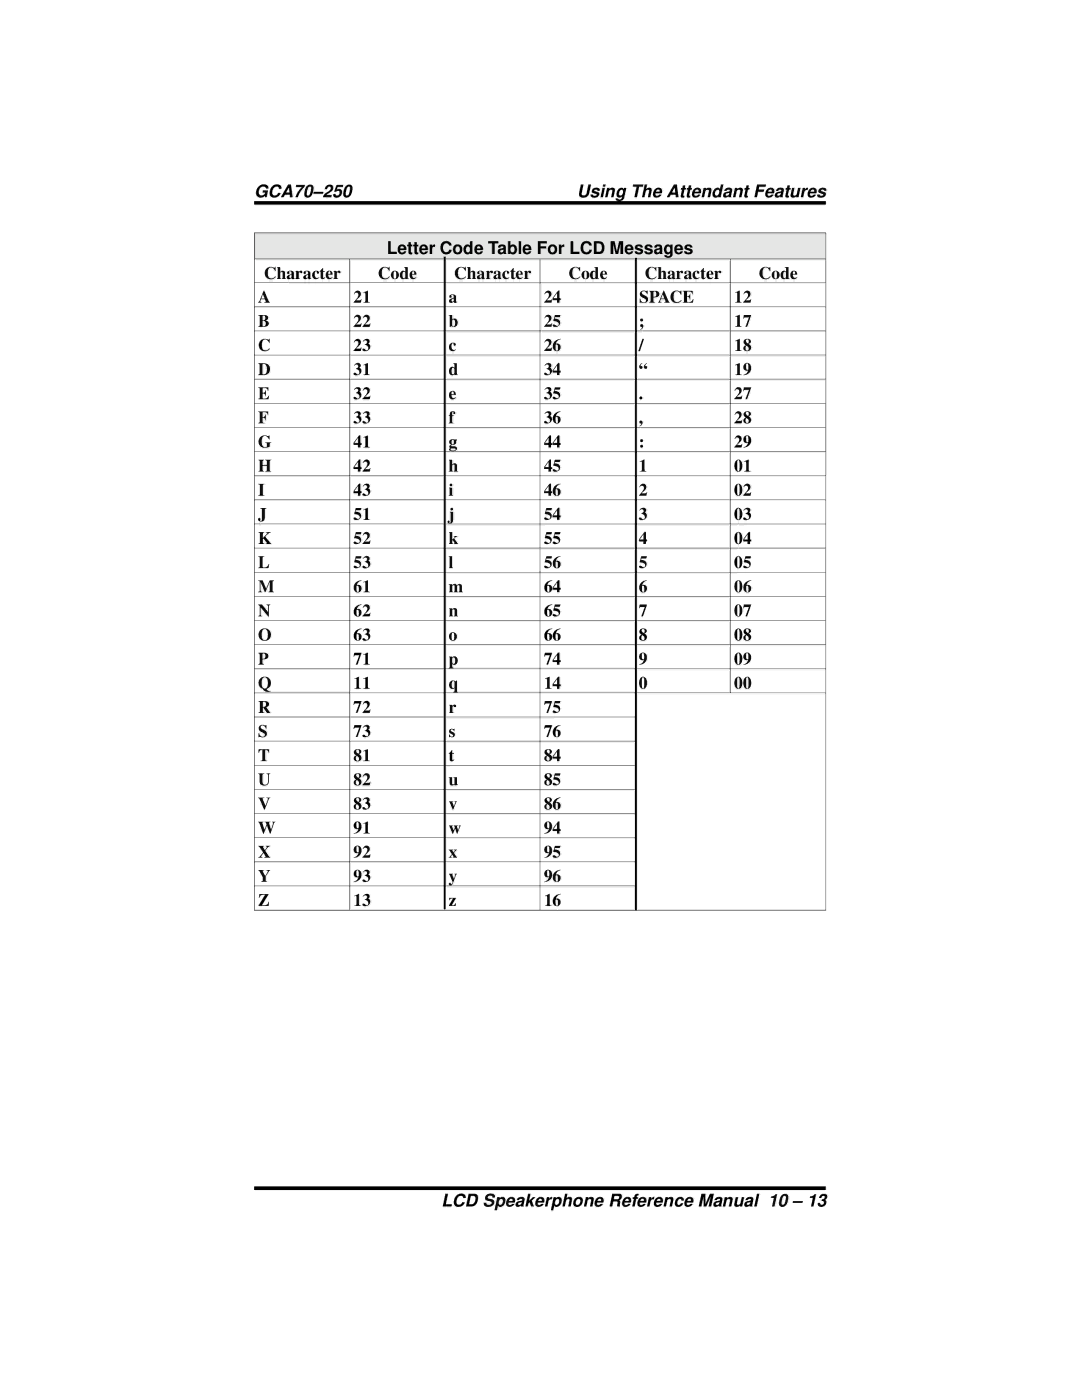 Vertical Communications 8312S, 8324S, 8324F manual Letter Code Table For LCD Messages 